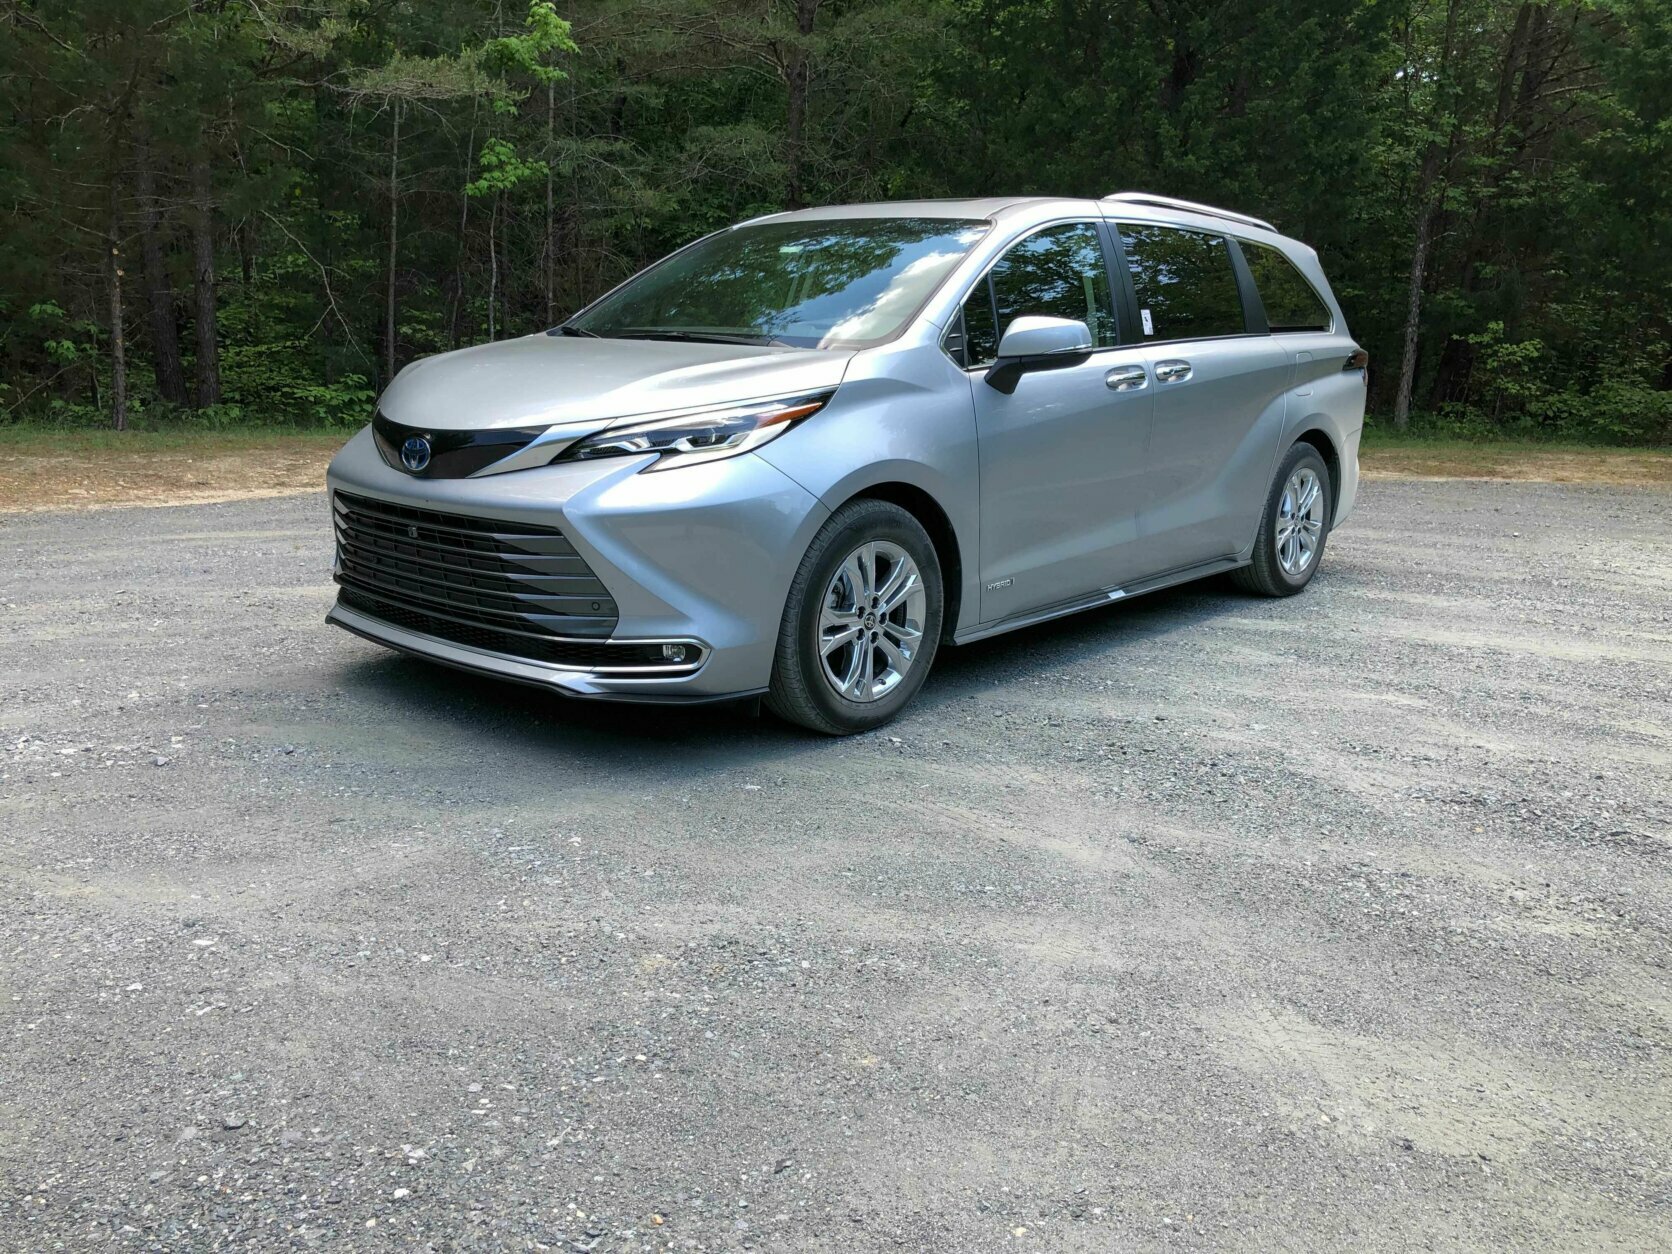 <p>Toyota dropped the V6 that has been a staple for years and switched to the carmaker’s hybrid system. While this is a boon for better MPG, it does lack punch and is sluggish when loaded up with people.</p>
